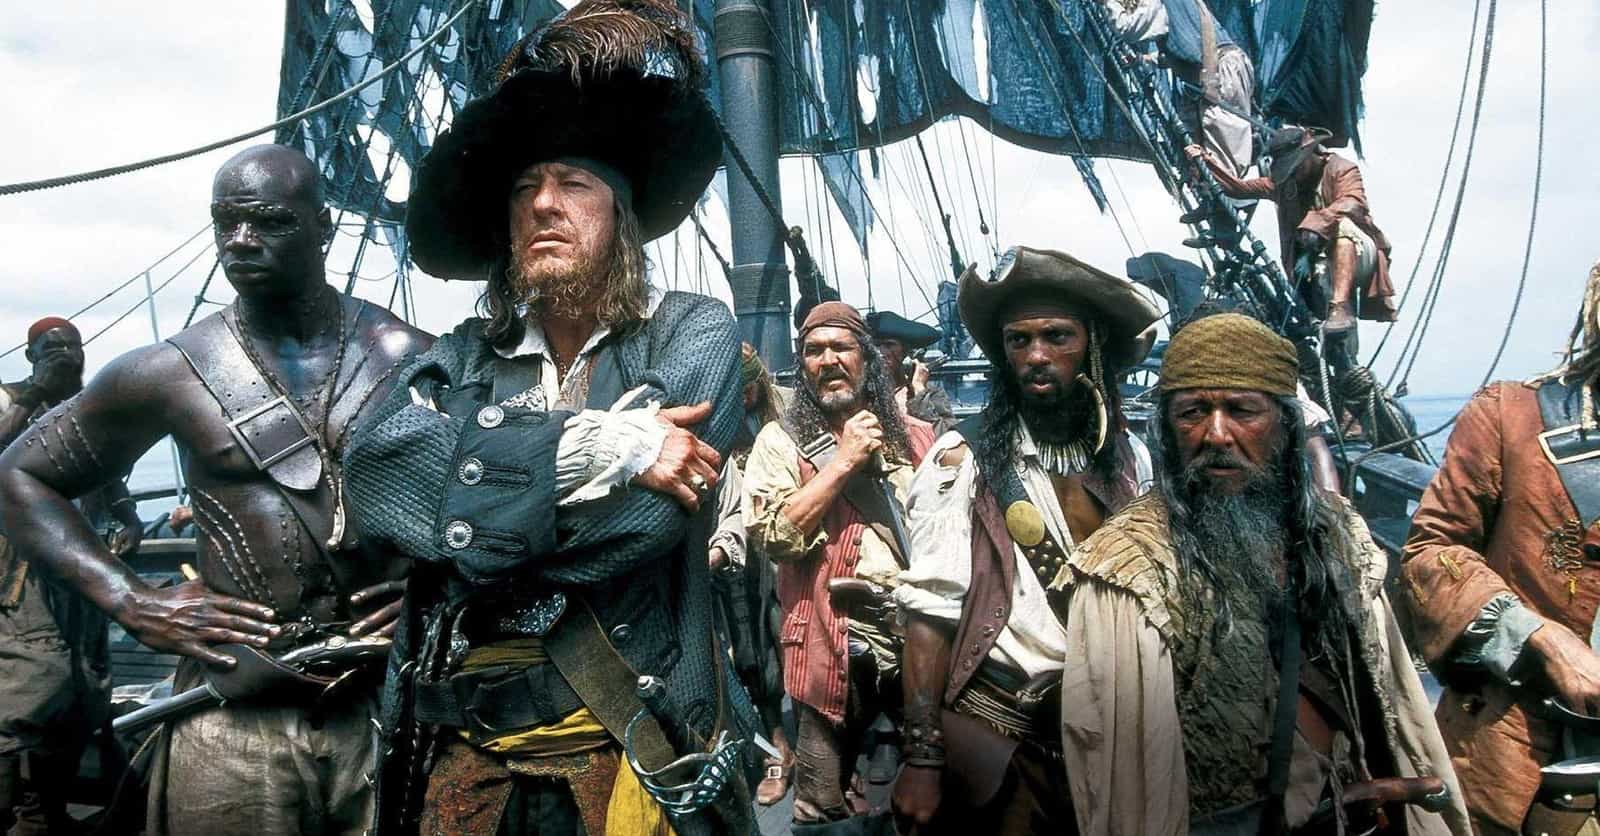 14 Of The Dumbest Things Pop Culture Has Us Believe About Pirates